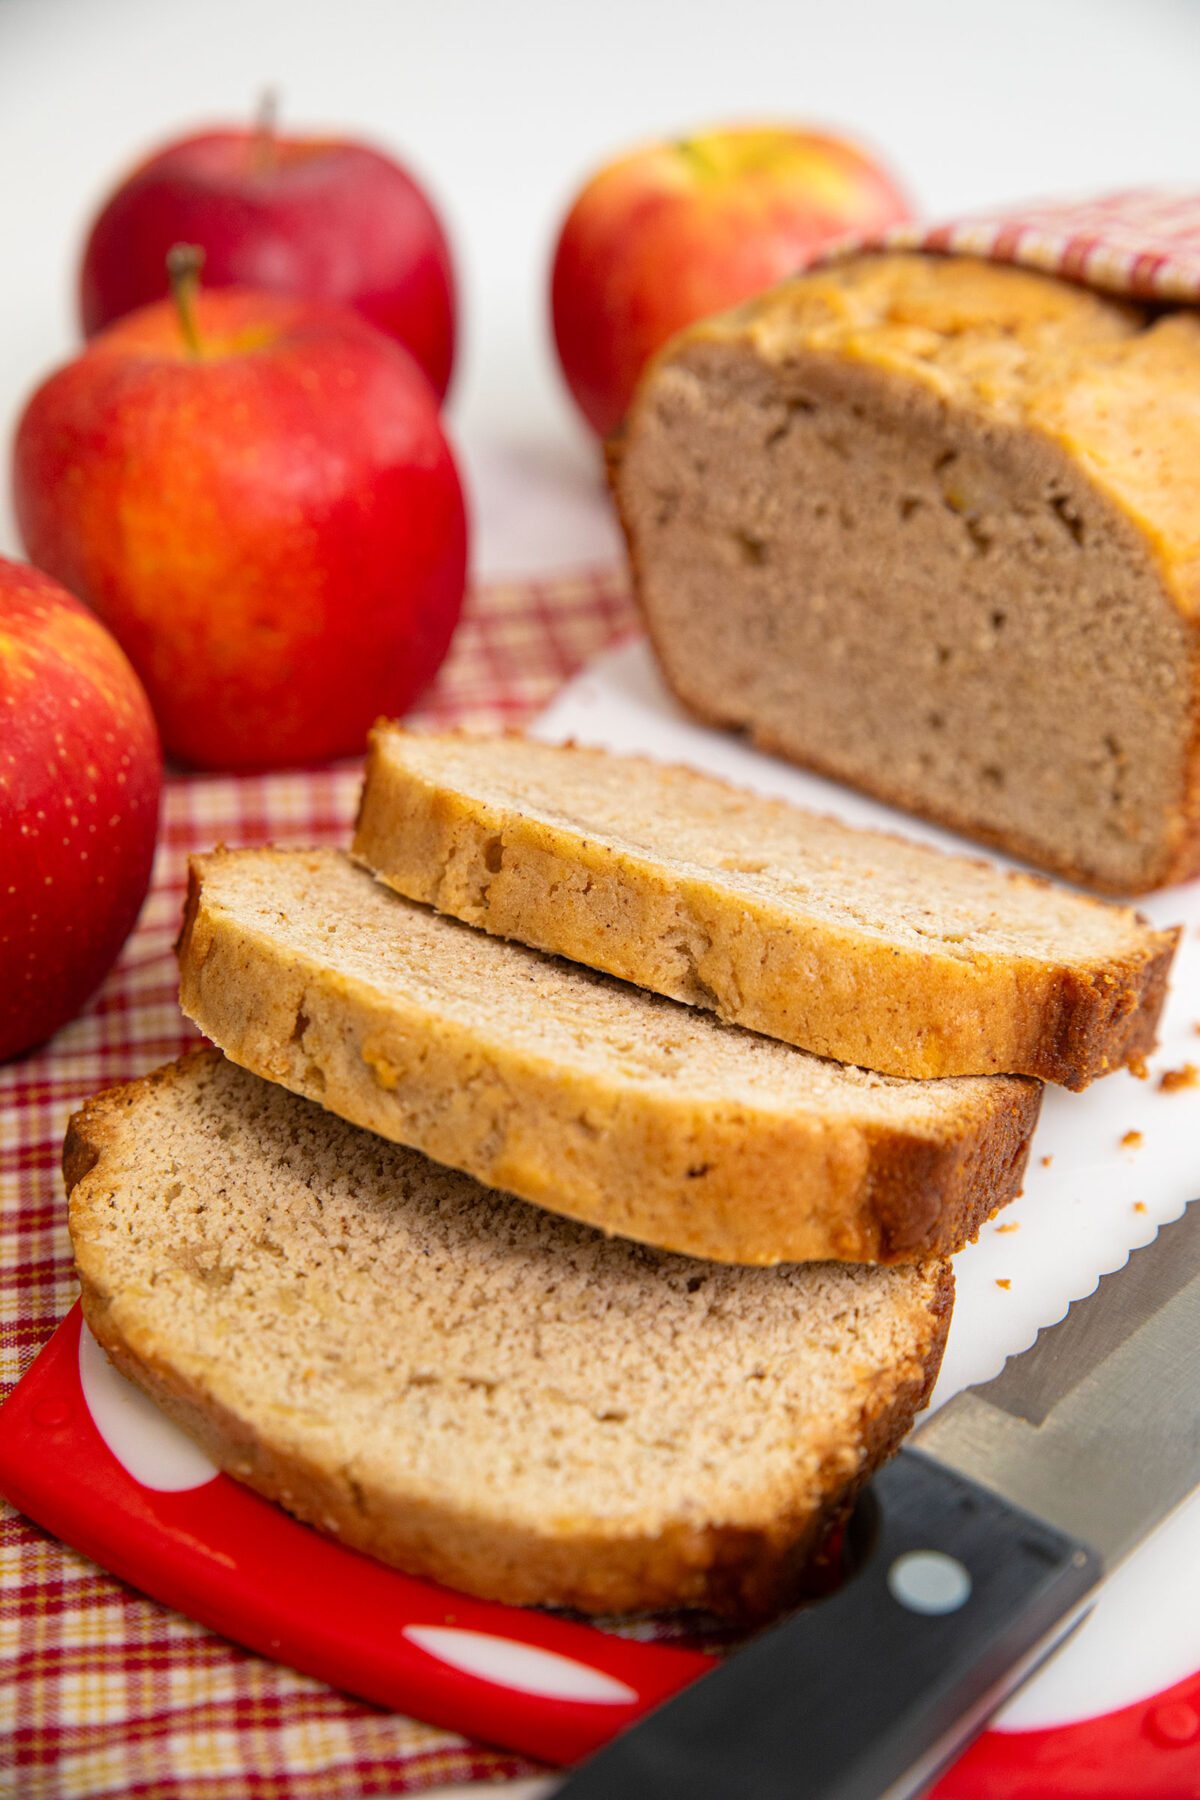 Sliced cinnamon apple loaf with apples on the side